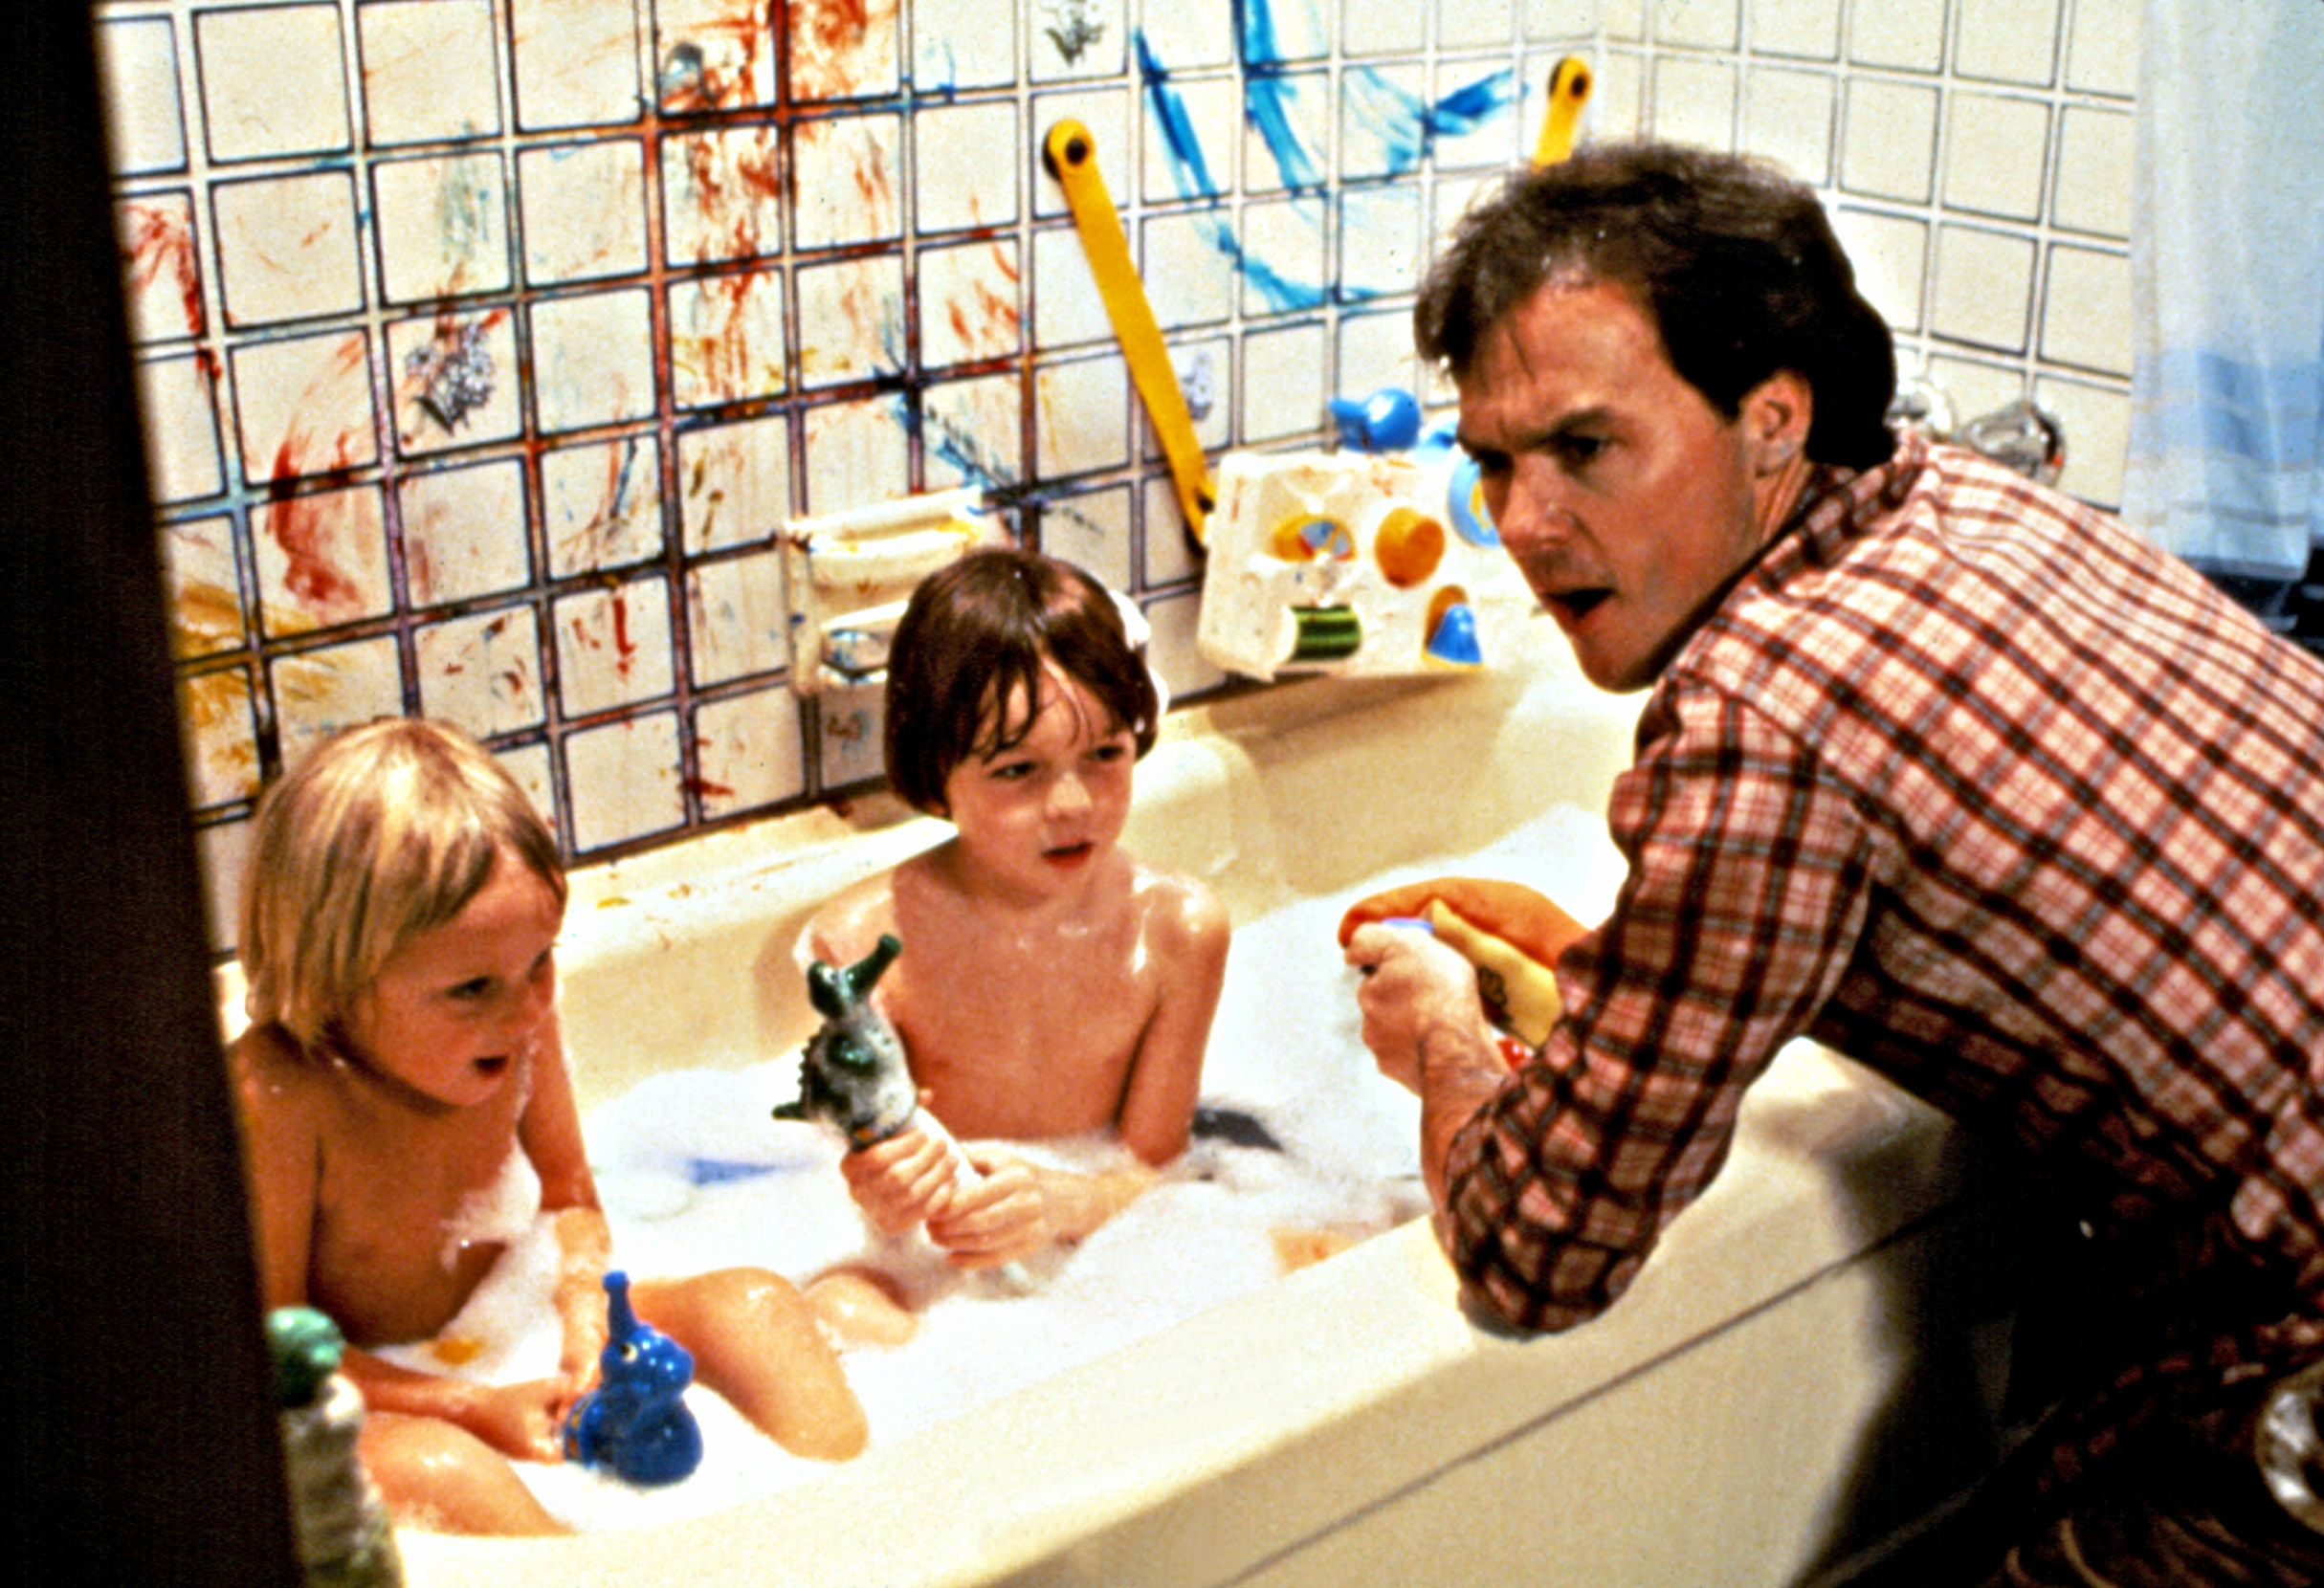 Michael Keaton supervises during bath-time as Taliesin Jaffe and Frederick Koehler sit in the tub in a scene from Mr. Mom